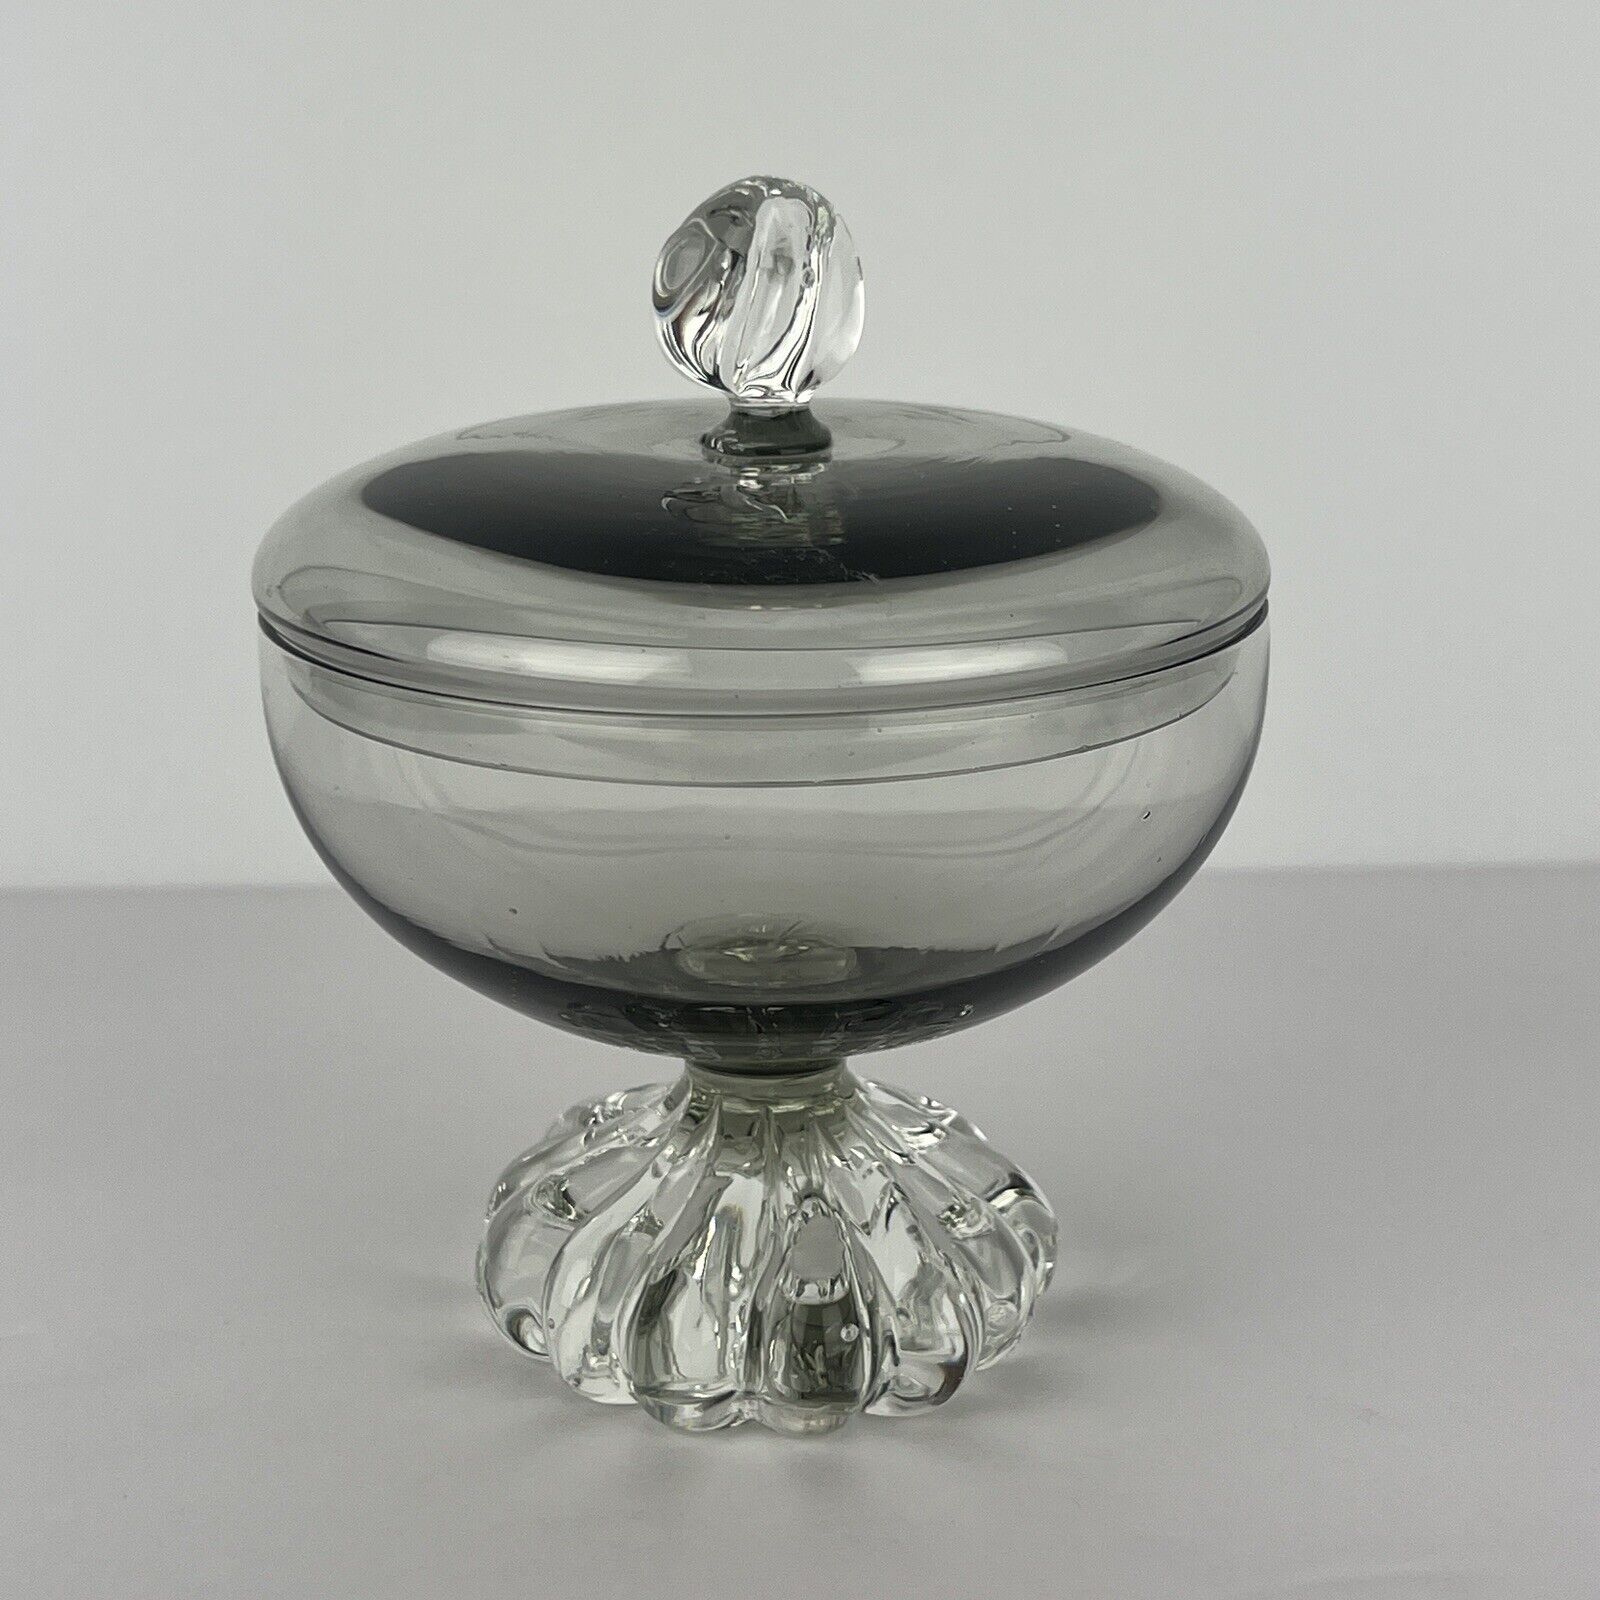 Vintage Smoked Glass Candy Dish Bowl Footed Sweden